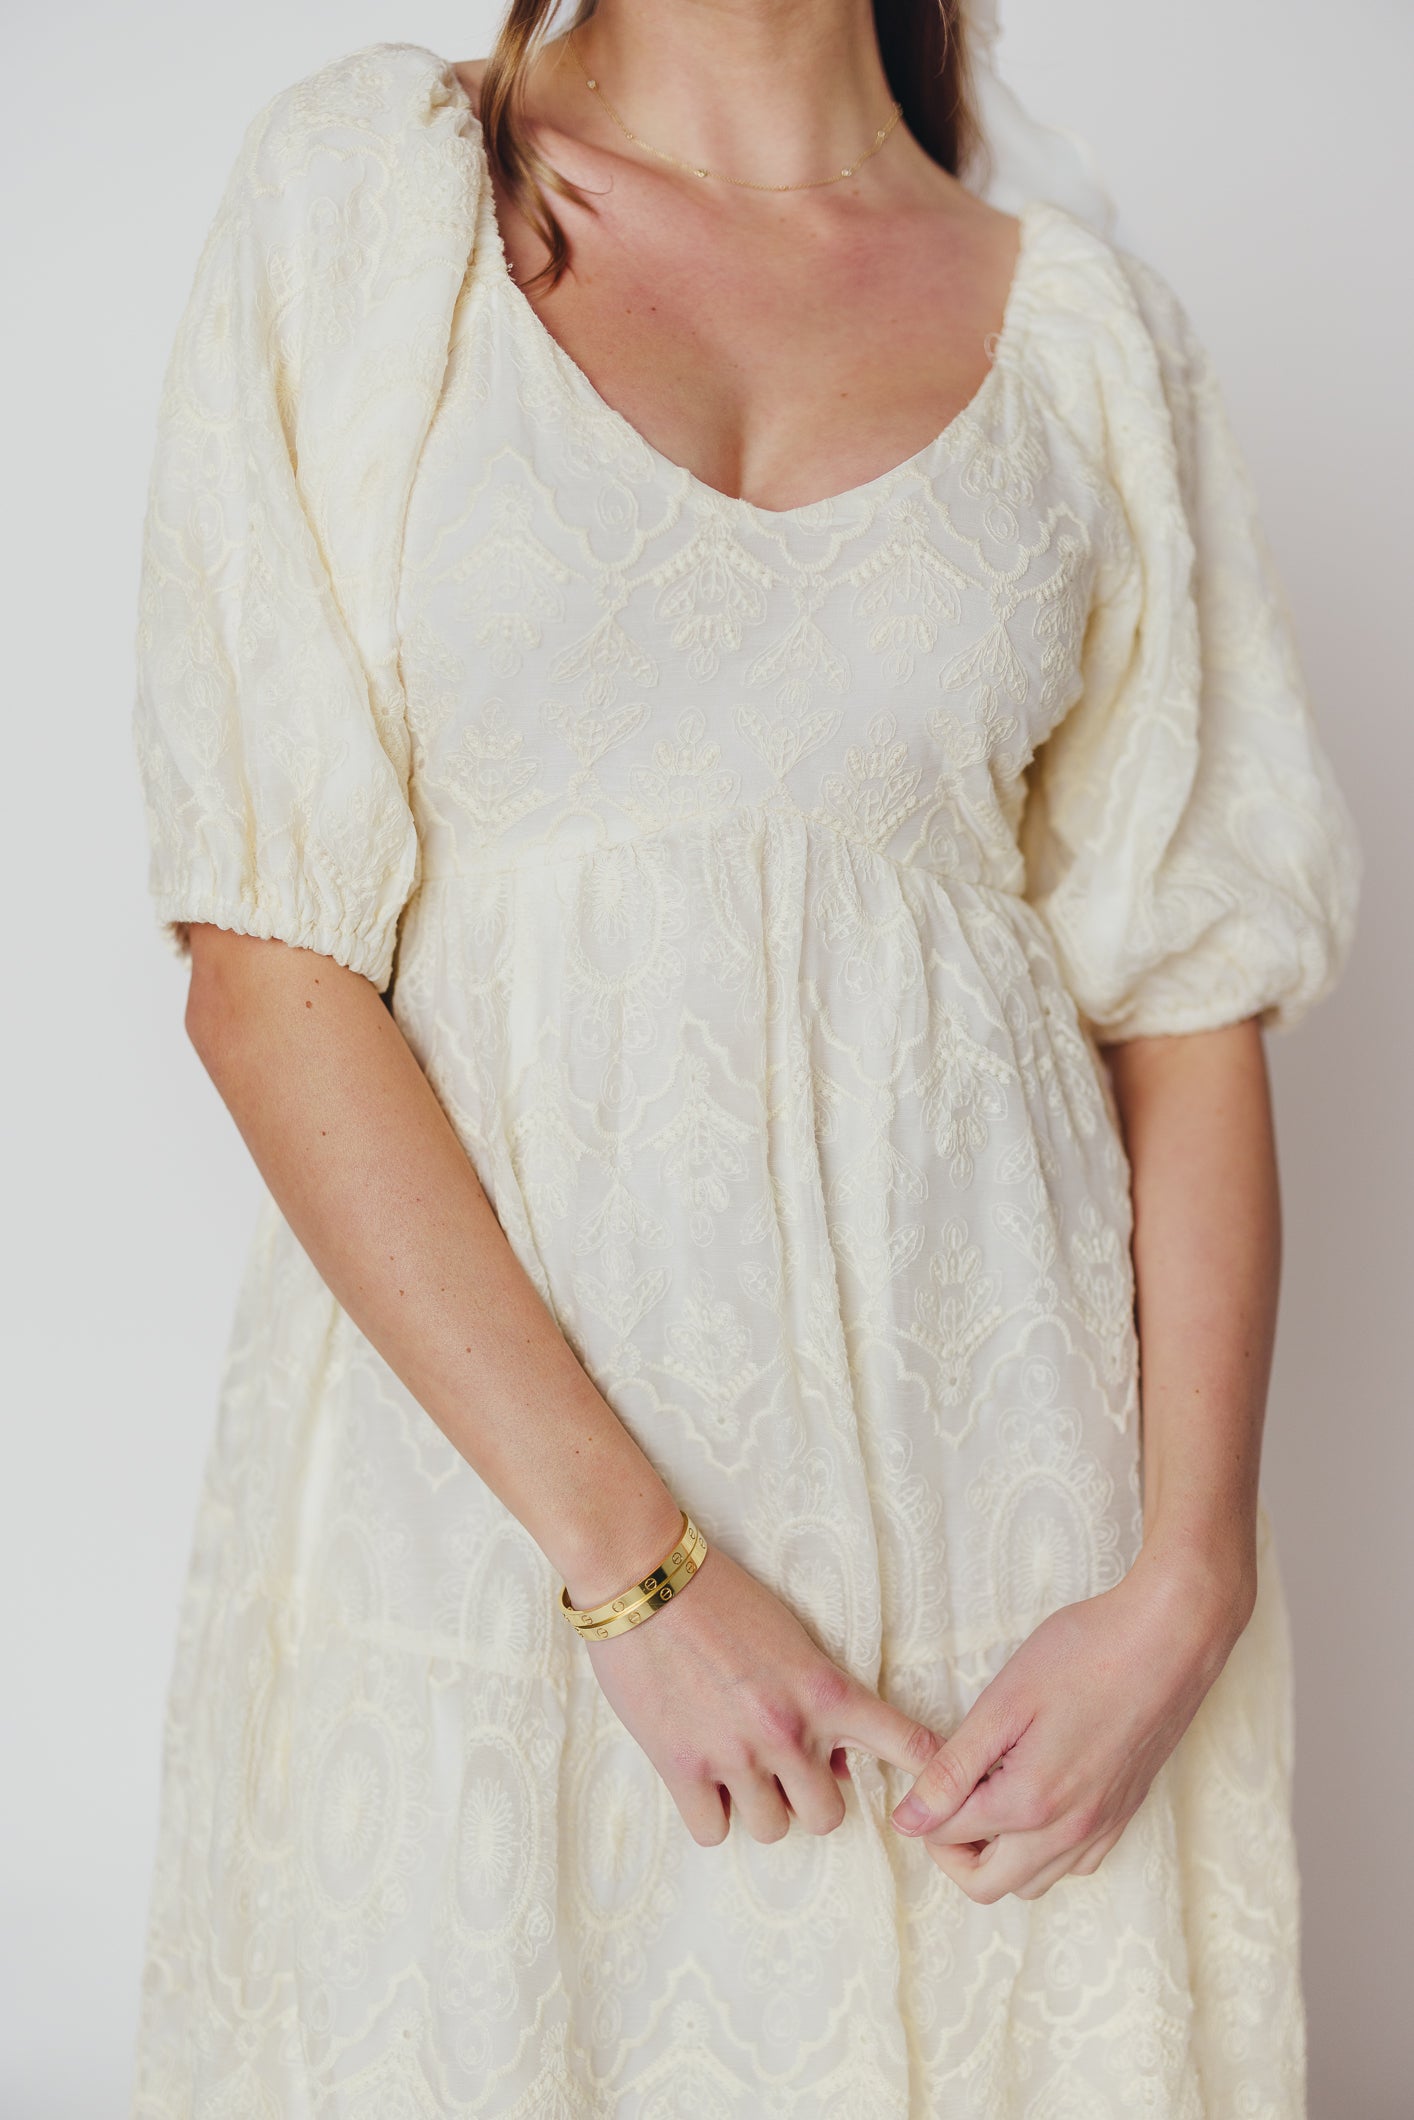 Stella Tiered Maxi Dress with Lace Overlay in Natural - Bump Friendly & Inclusive Sizing (S-3XL)